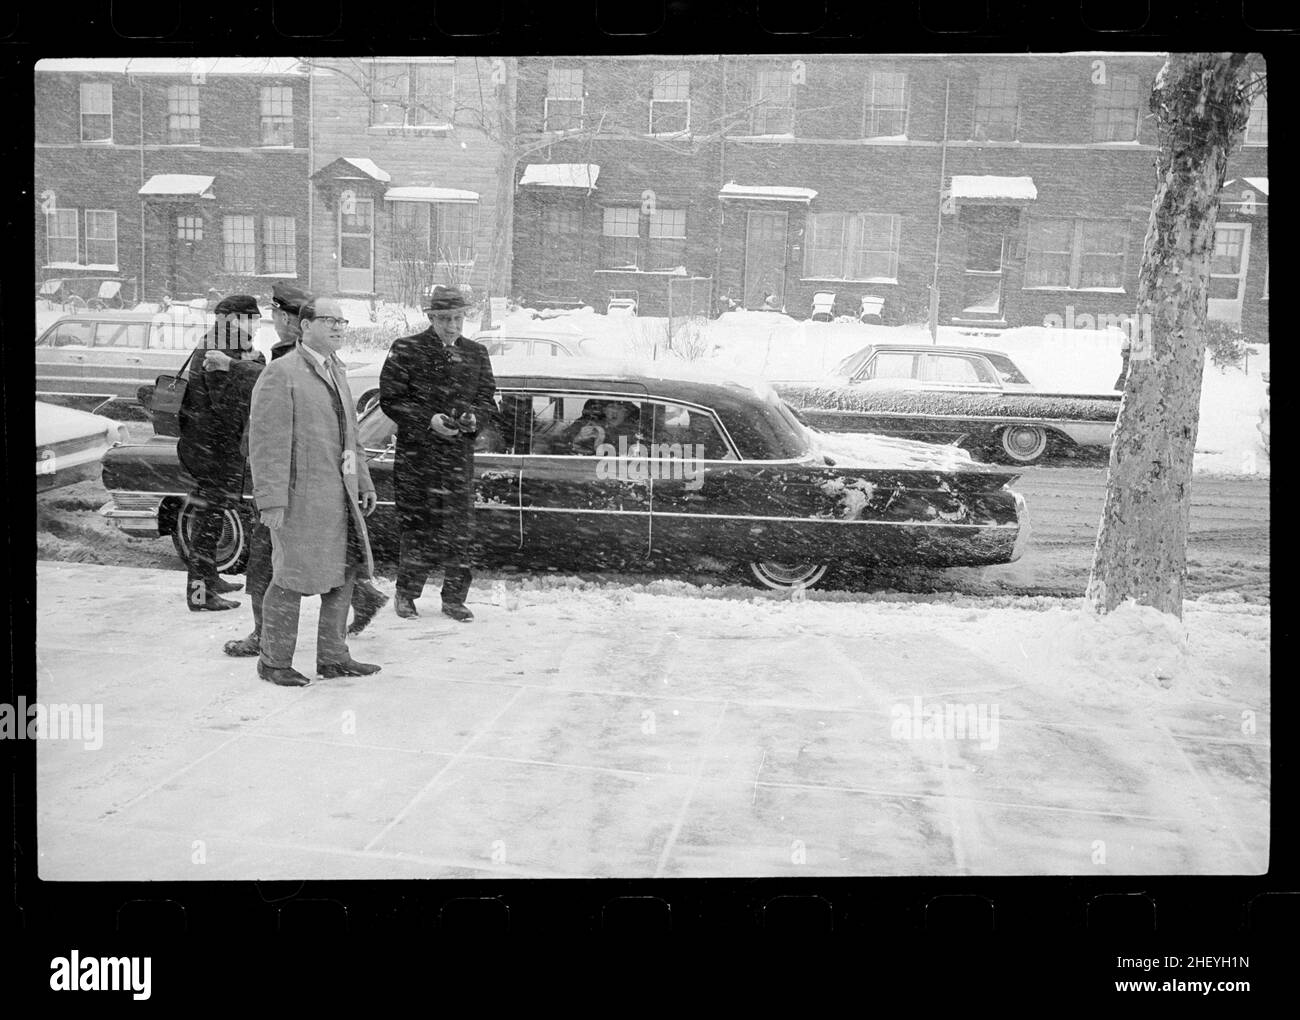 The Beatles arriving in the snow storm. 1964 February 11. Trikosko, Marion S., photographer. The Beatles’ first US concert, Washington Coliseum. Stock Photo